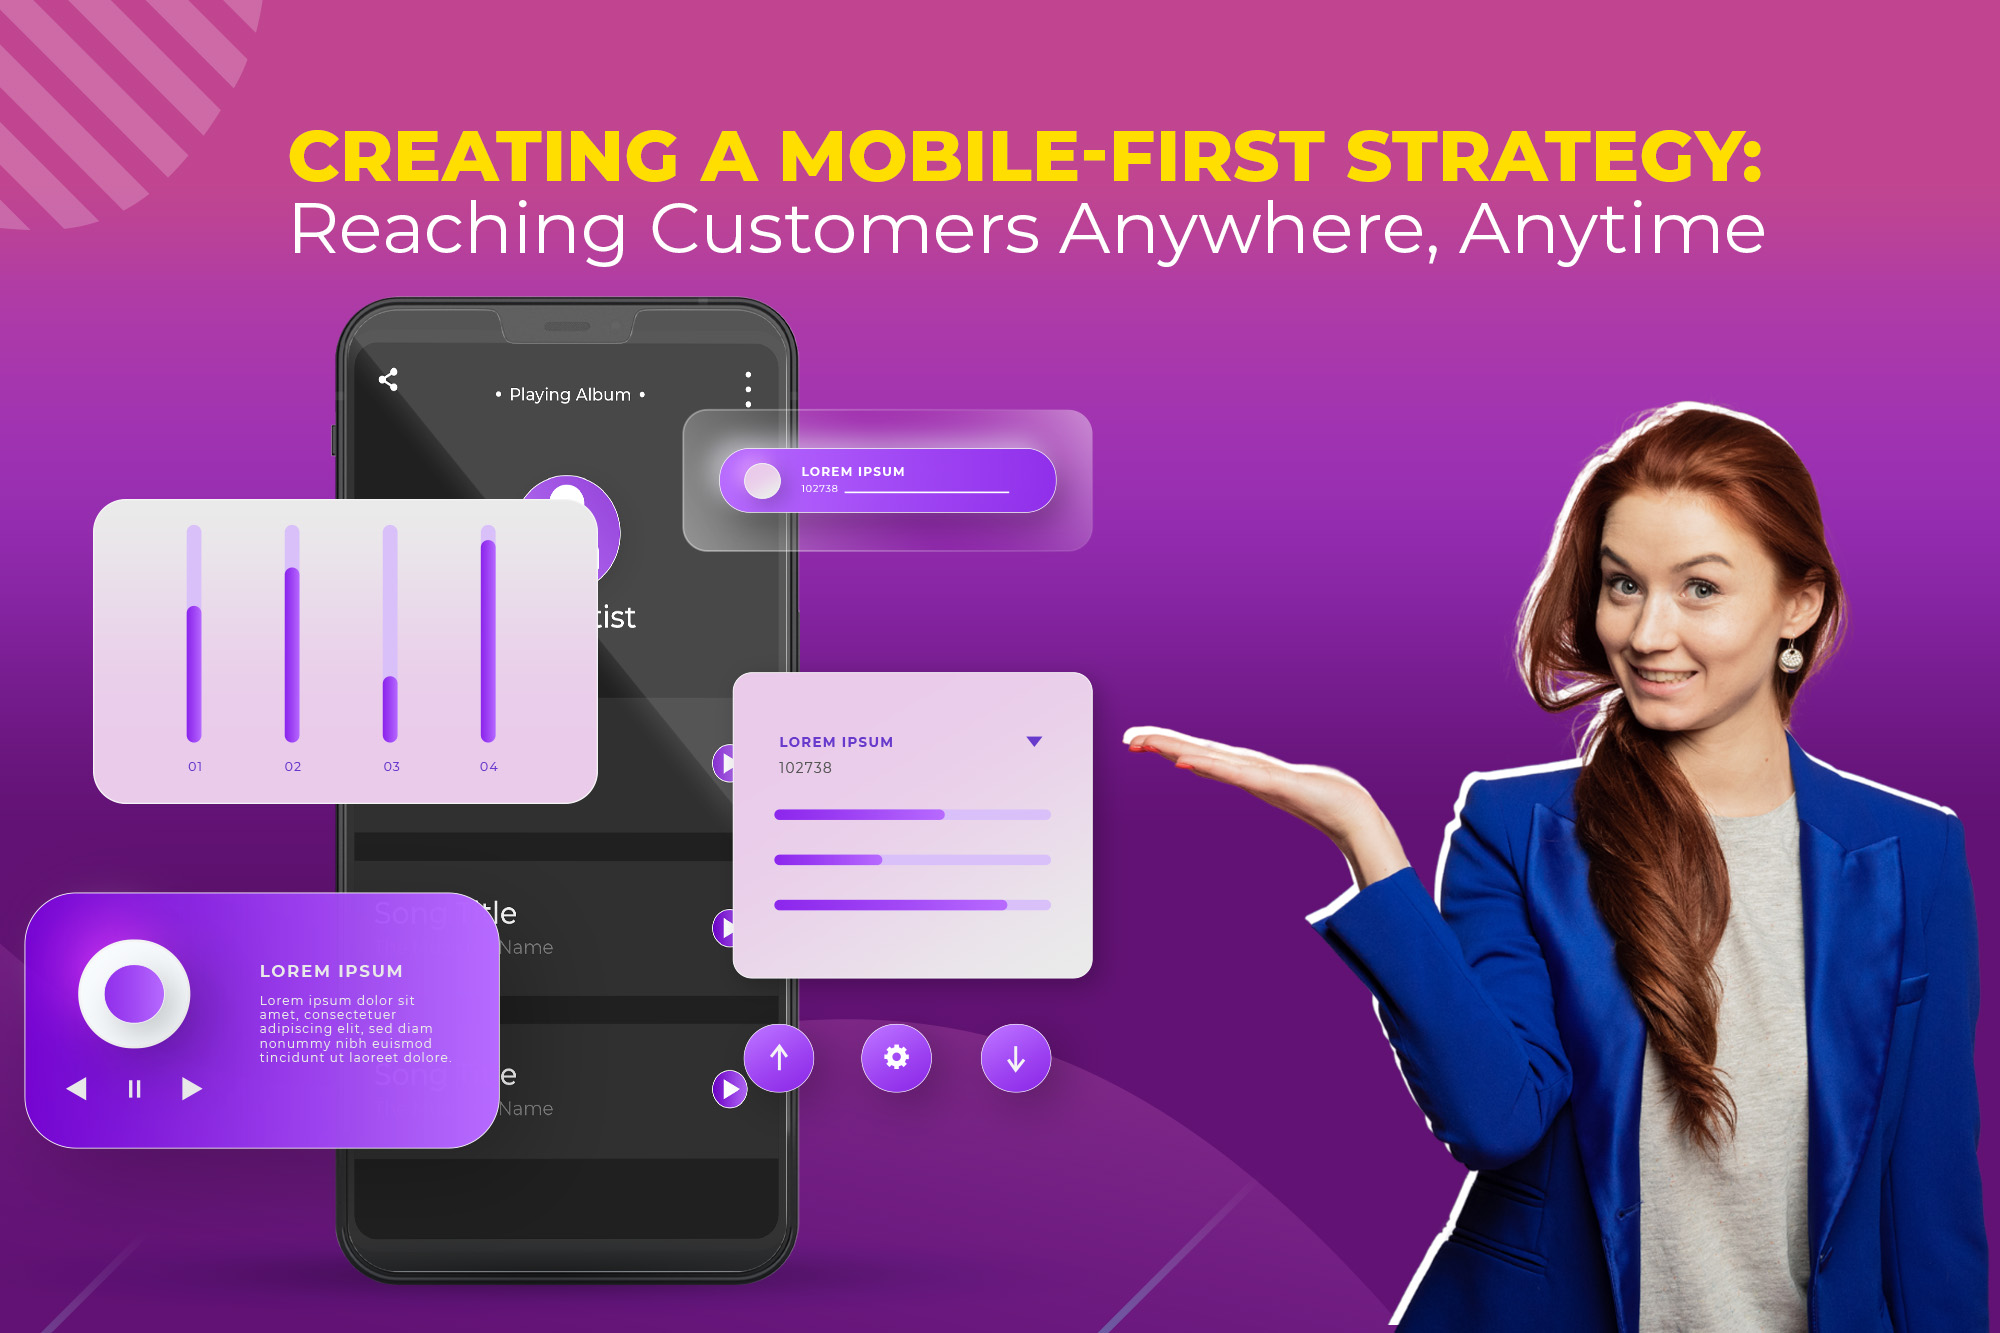 Creating a Mobile-First Strategy: Reaching Customers Anywhere, Anytime